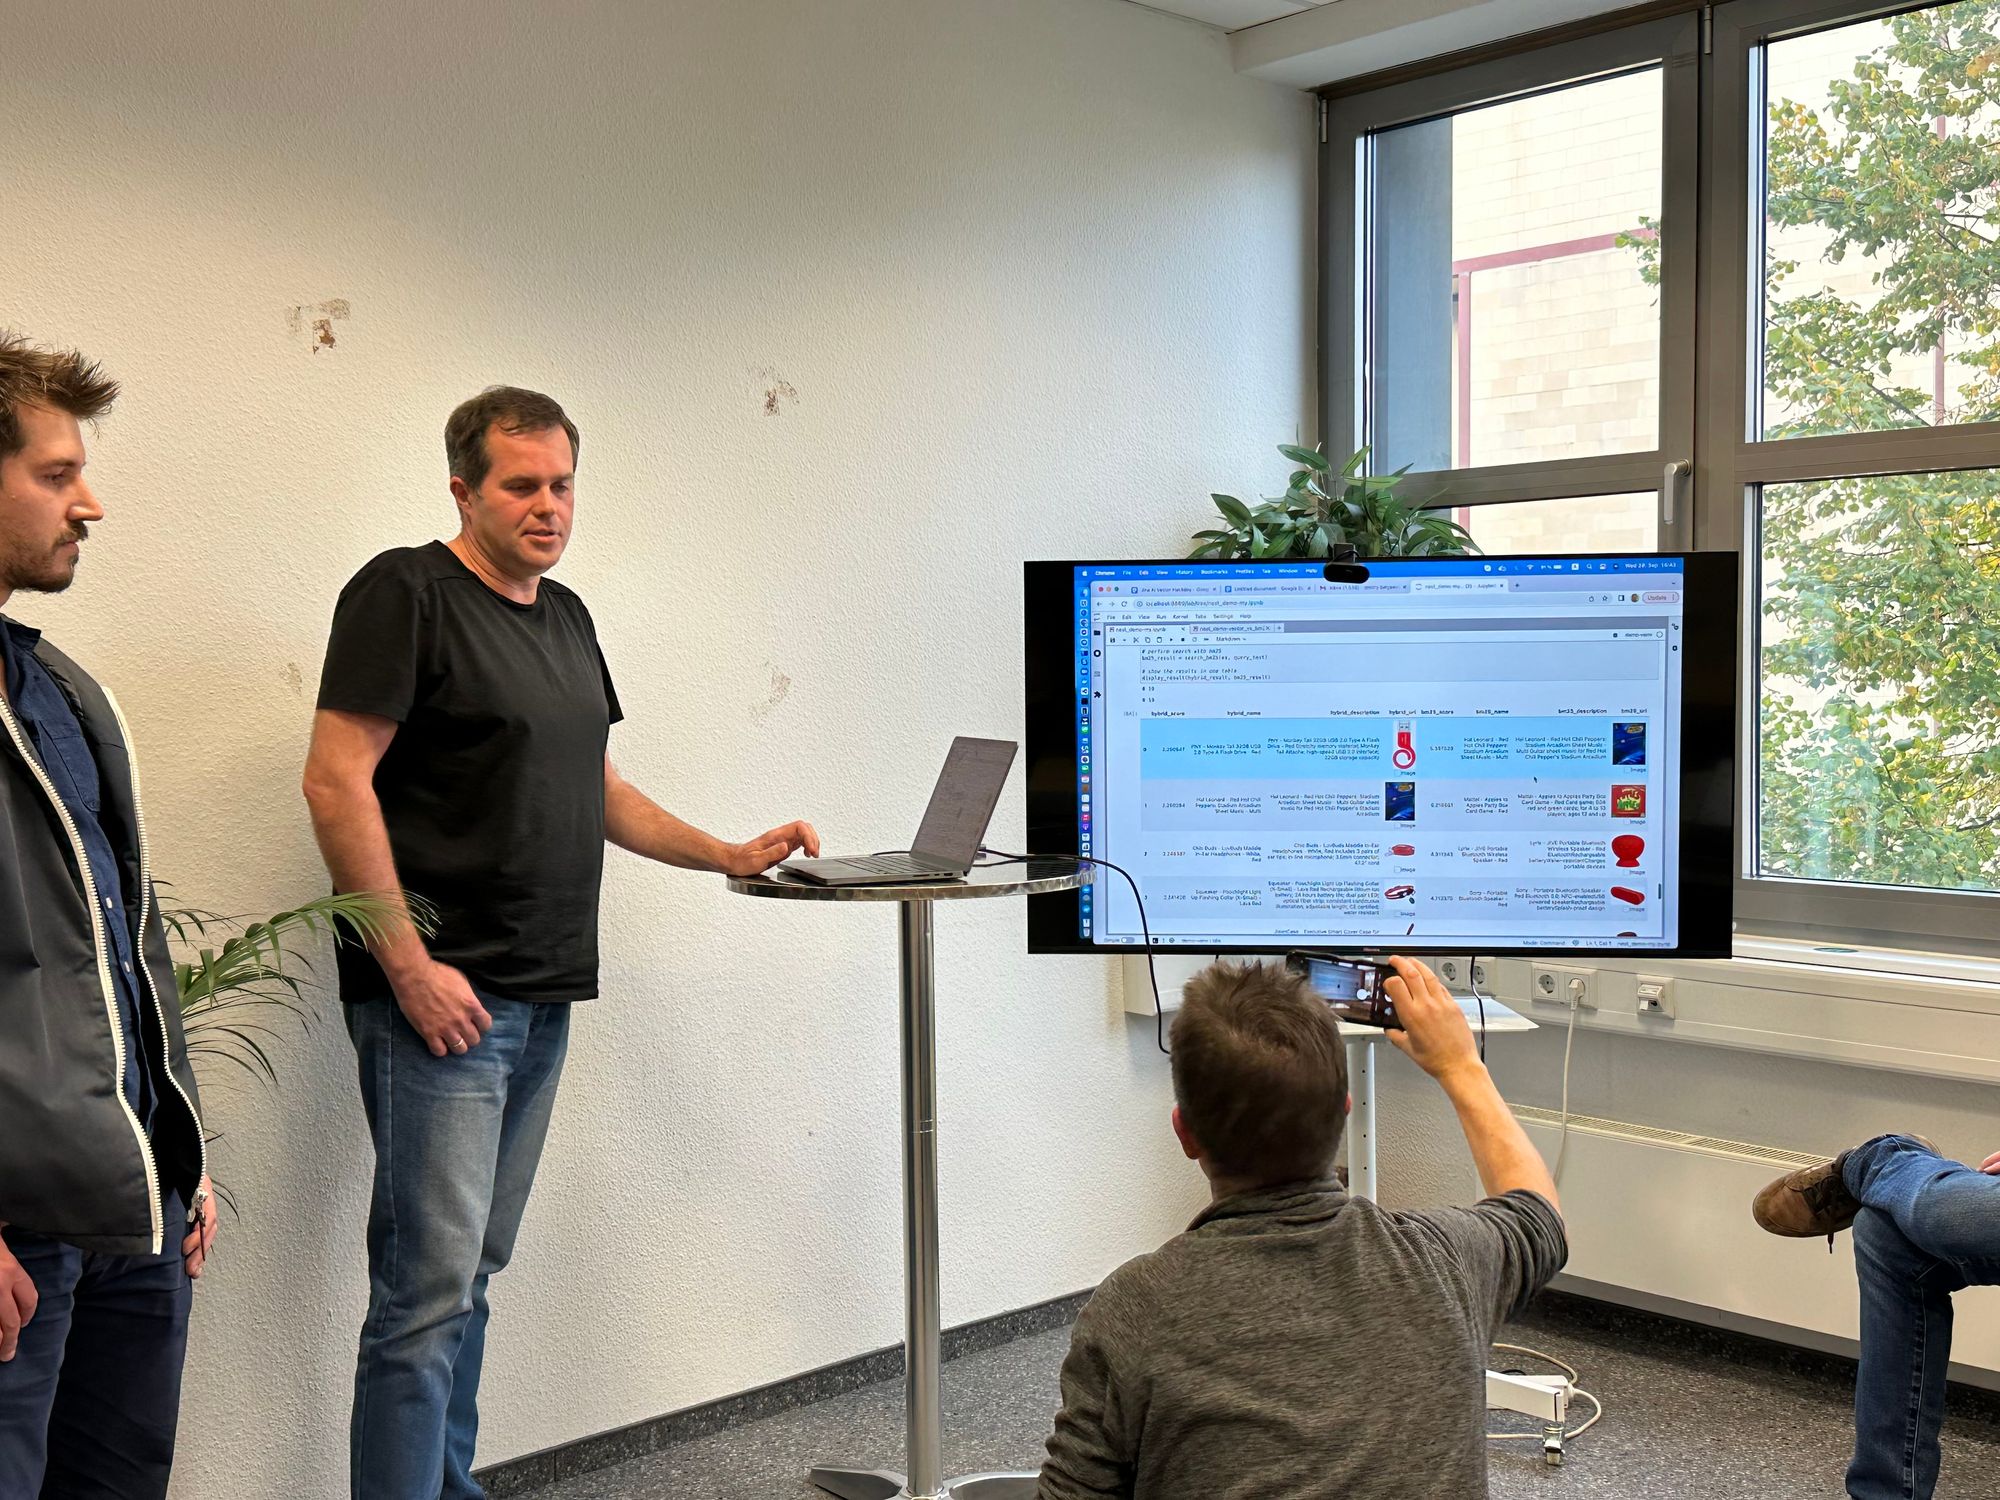 Three individuals engage in a presentation involving a large monitor displaying a webpage, in a room with a whiteboard and a window with greenery